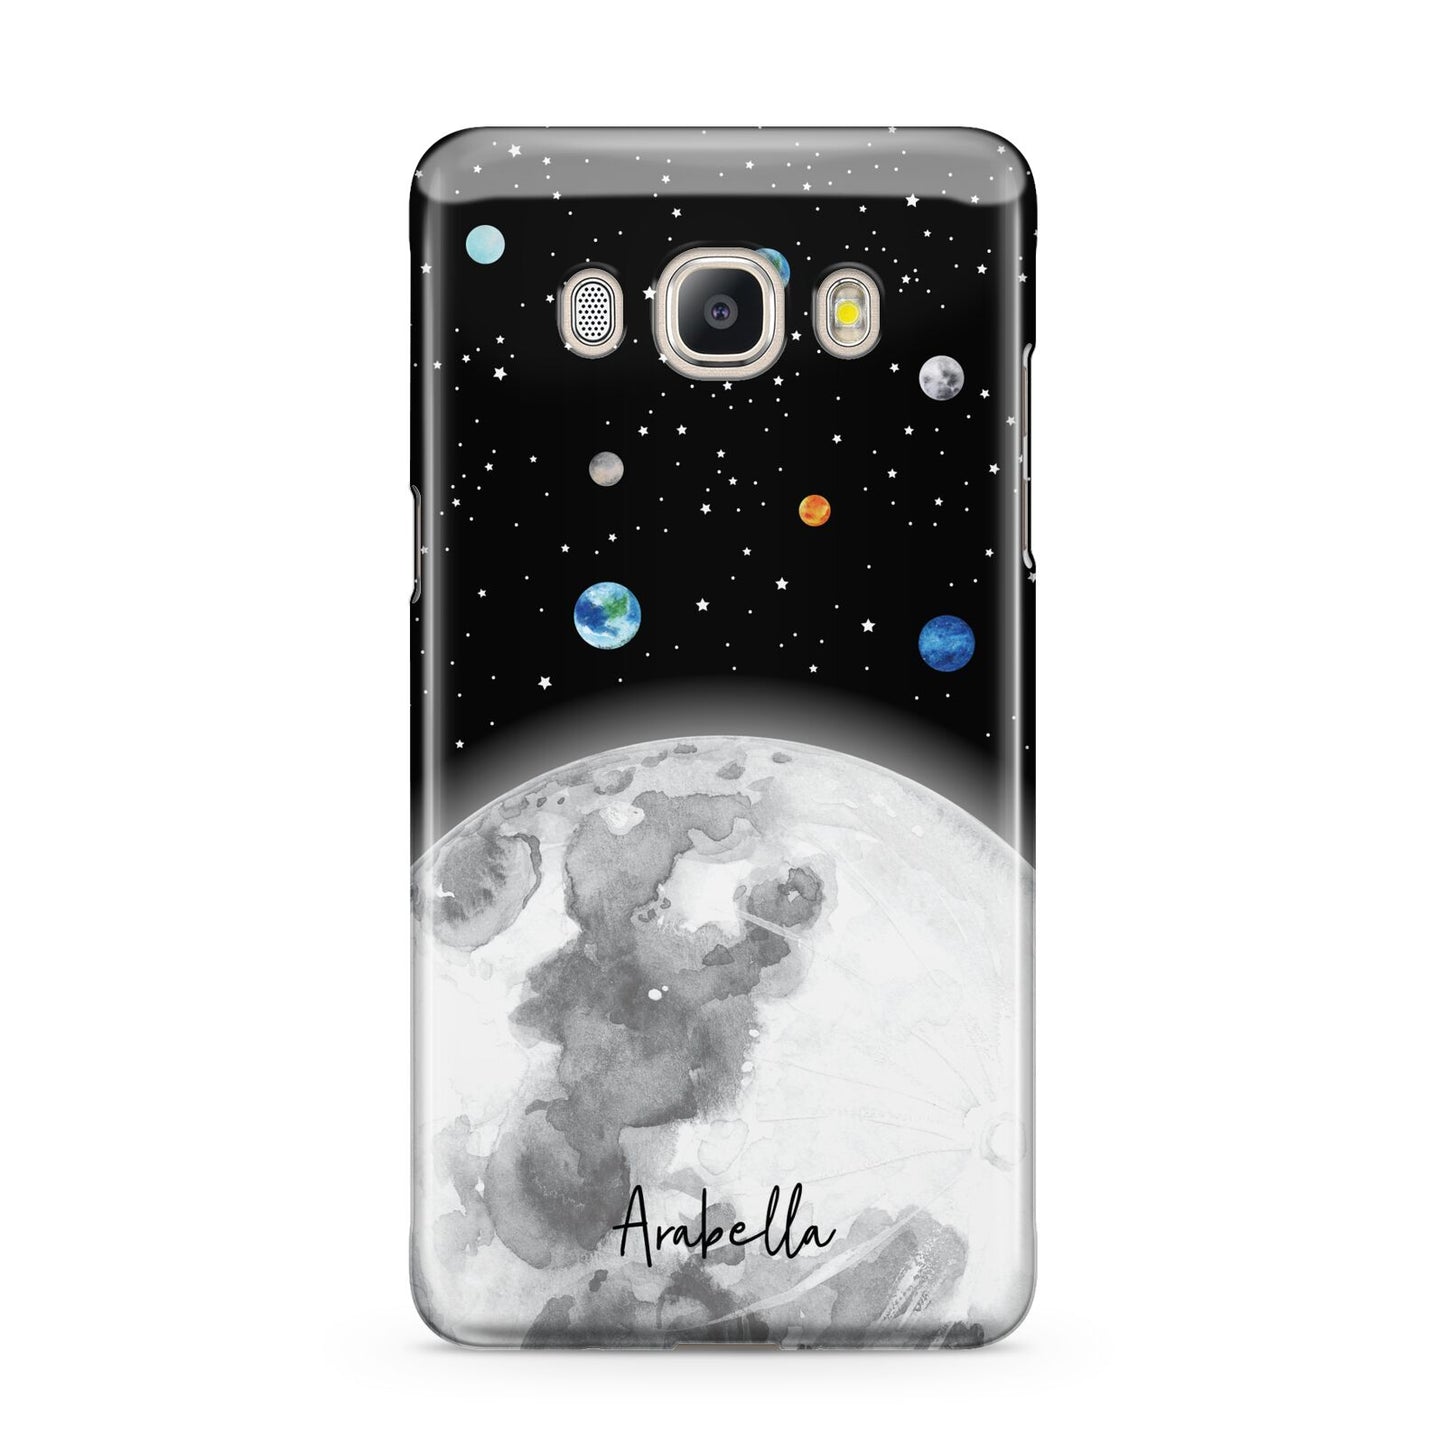 Watercolour Close up Moon with Name Samsung Galaxy J5 2016 Case